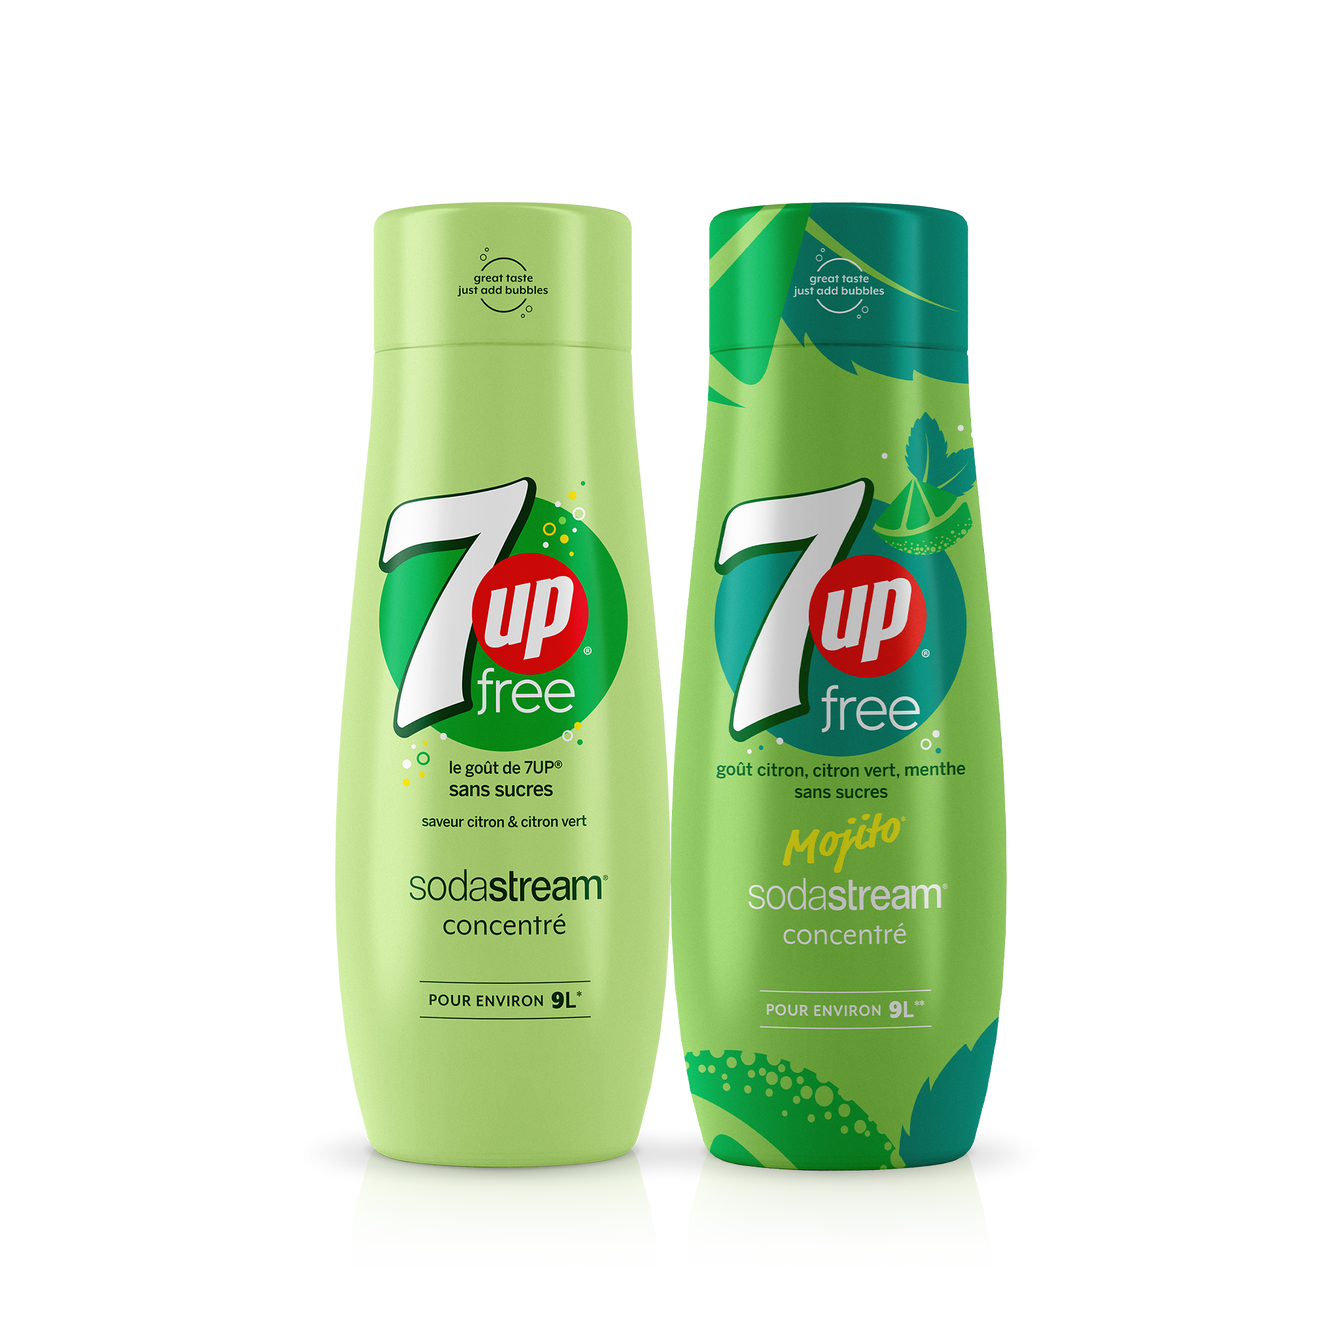 DUO 7up FREE